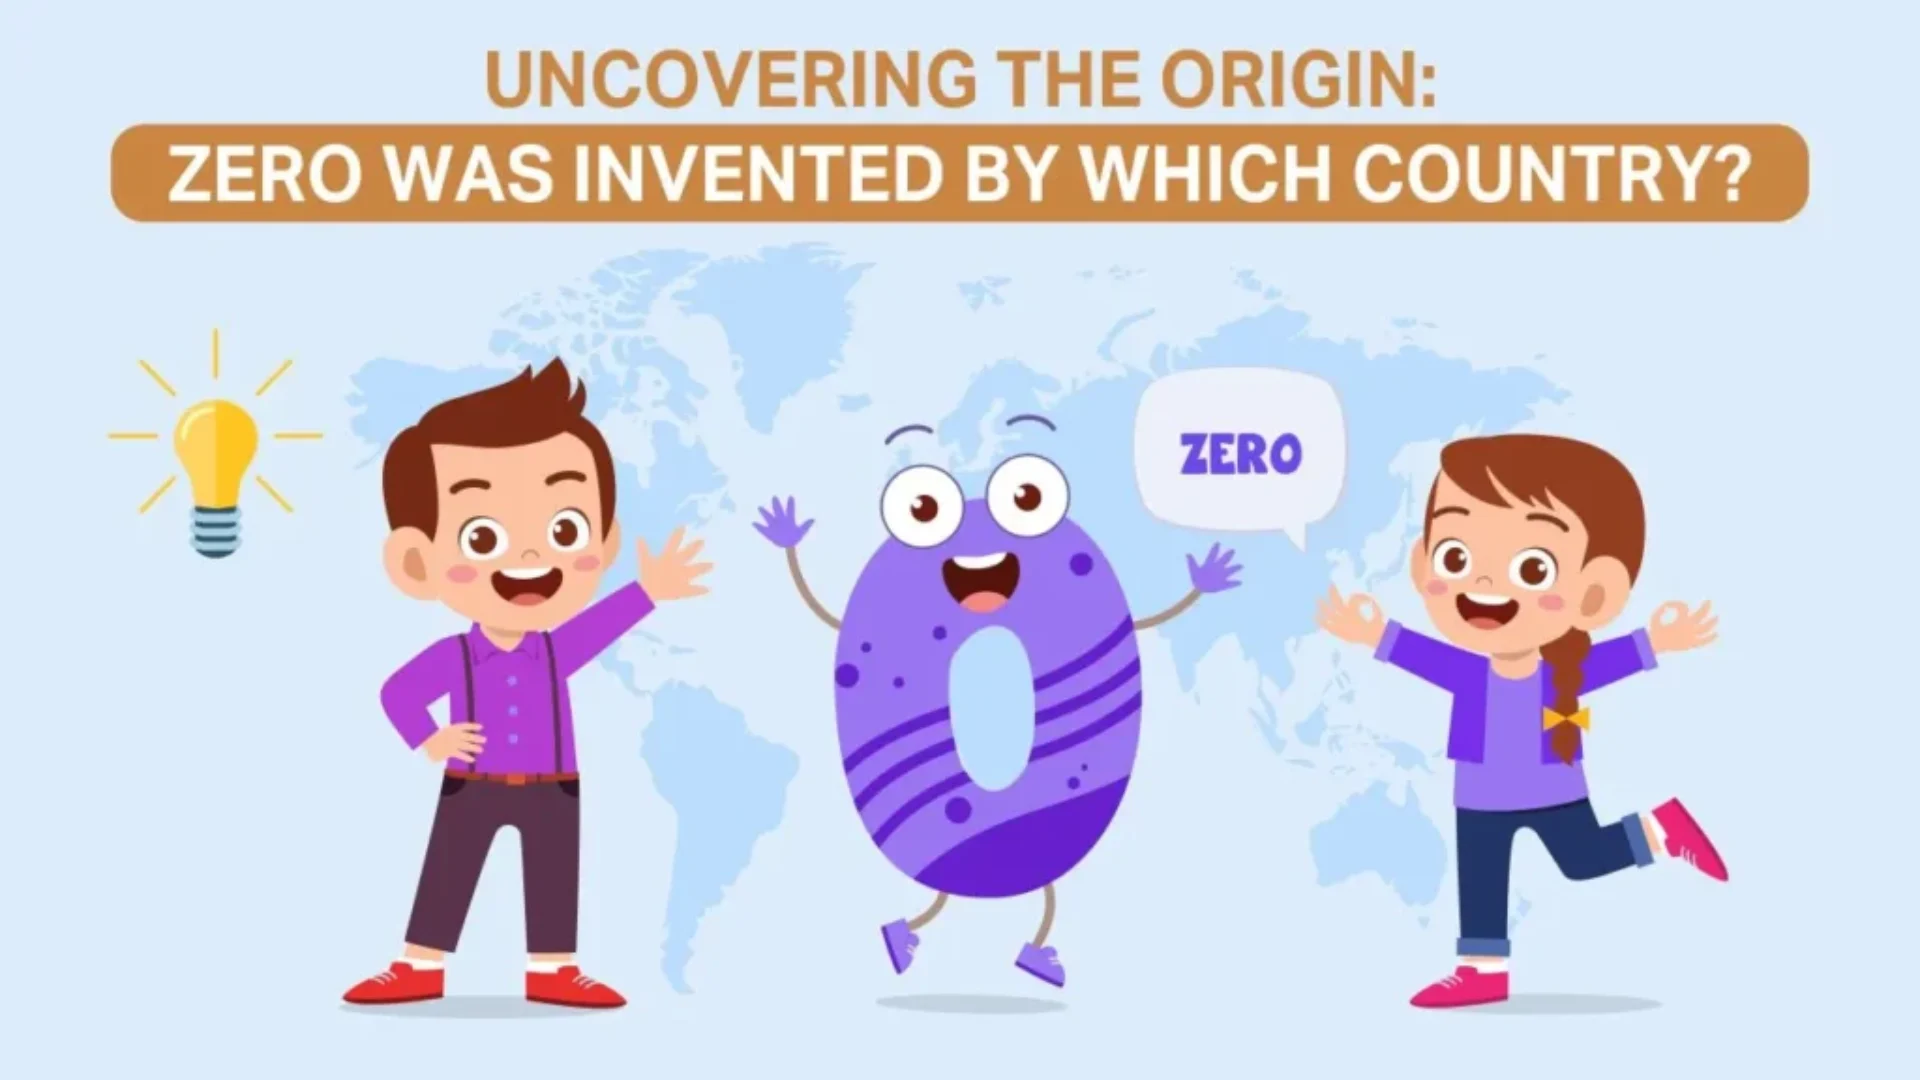 Zero was invented by which country